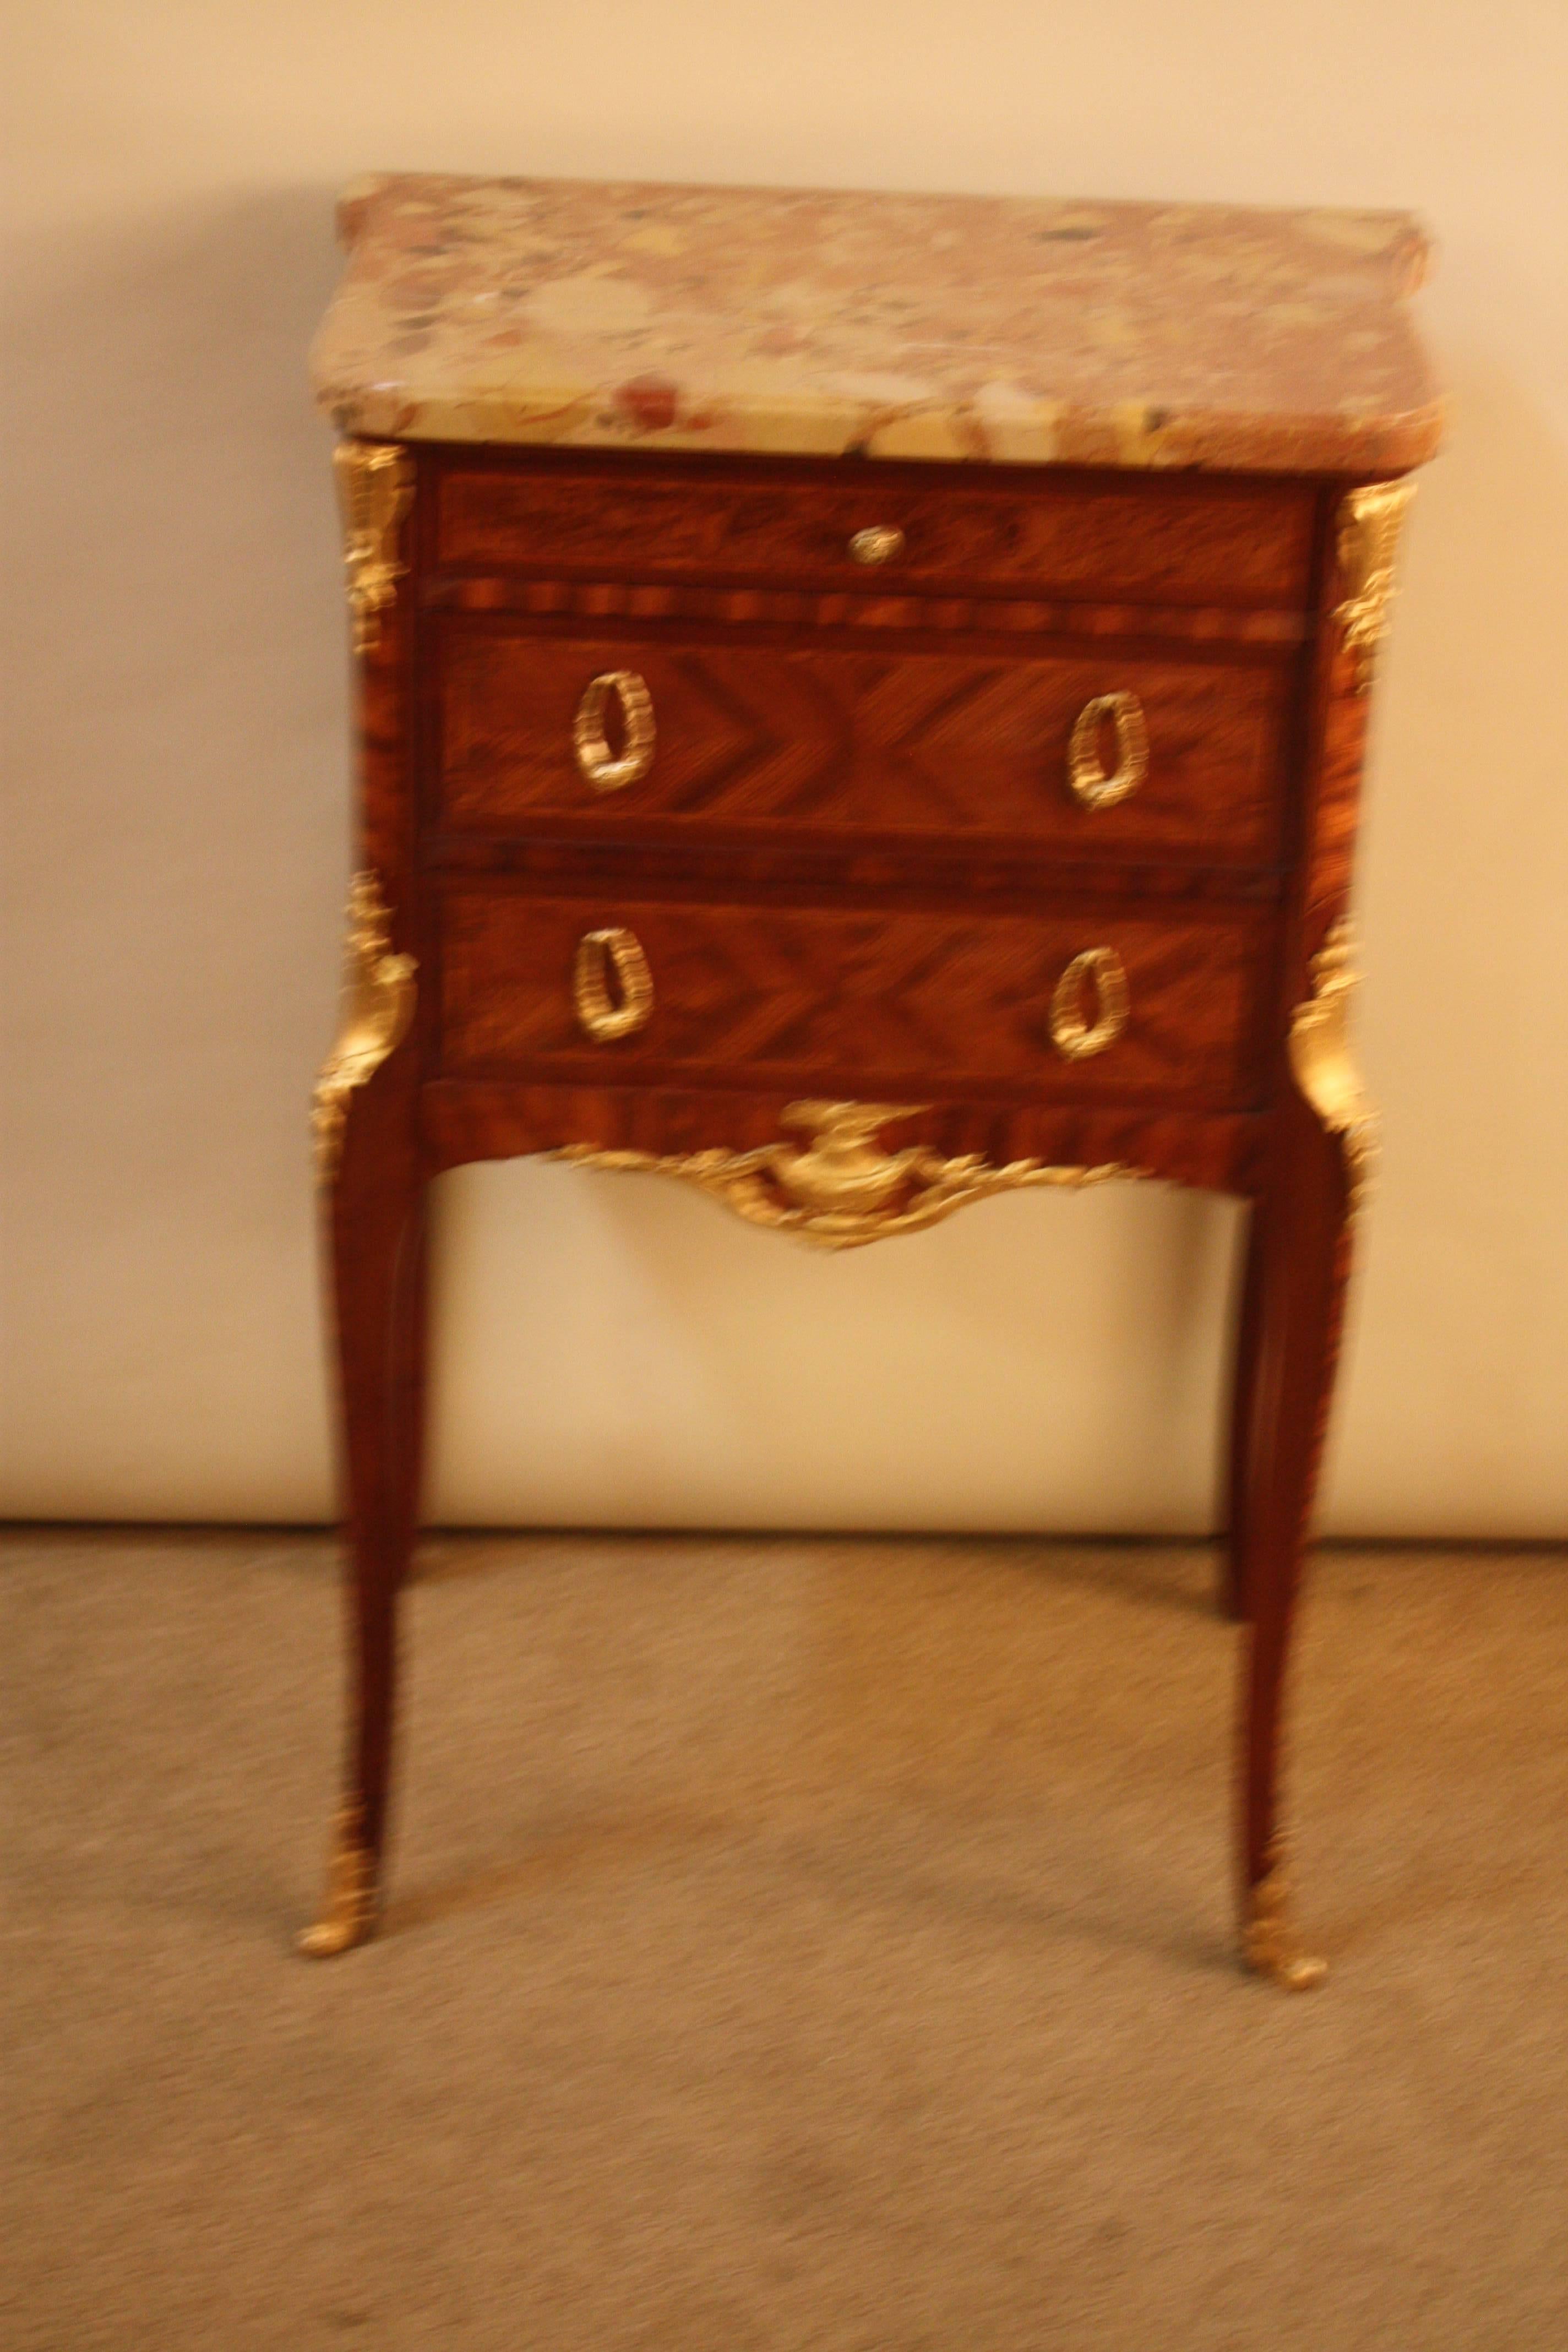 French 19th century inlaid wood and marble top side table. This table features finely cast bronze neoclassical design decoration with marble liner.